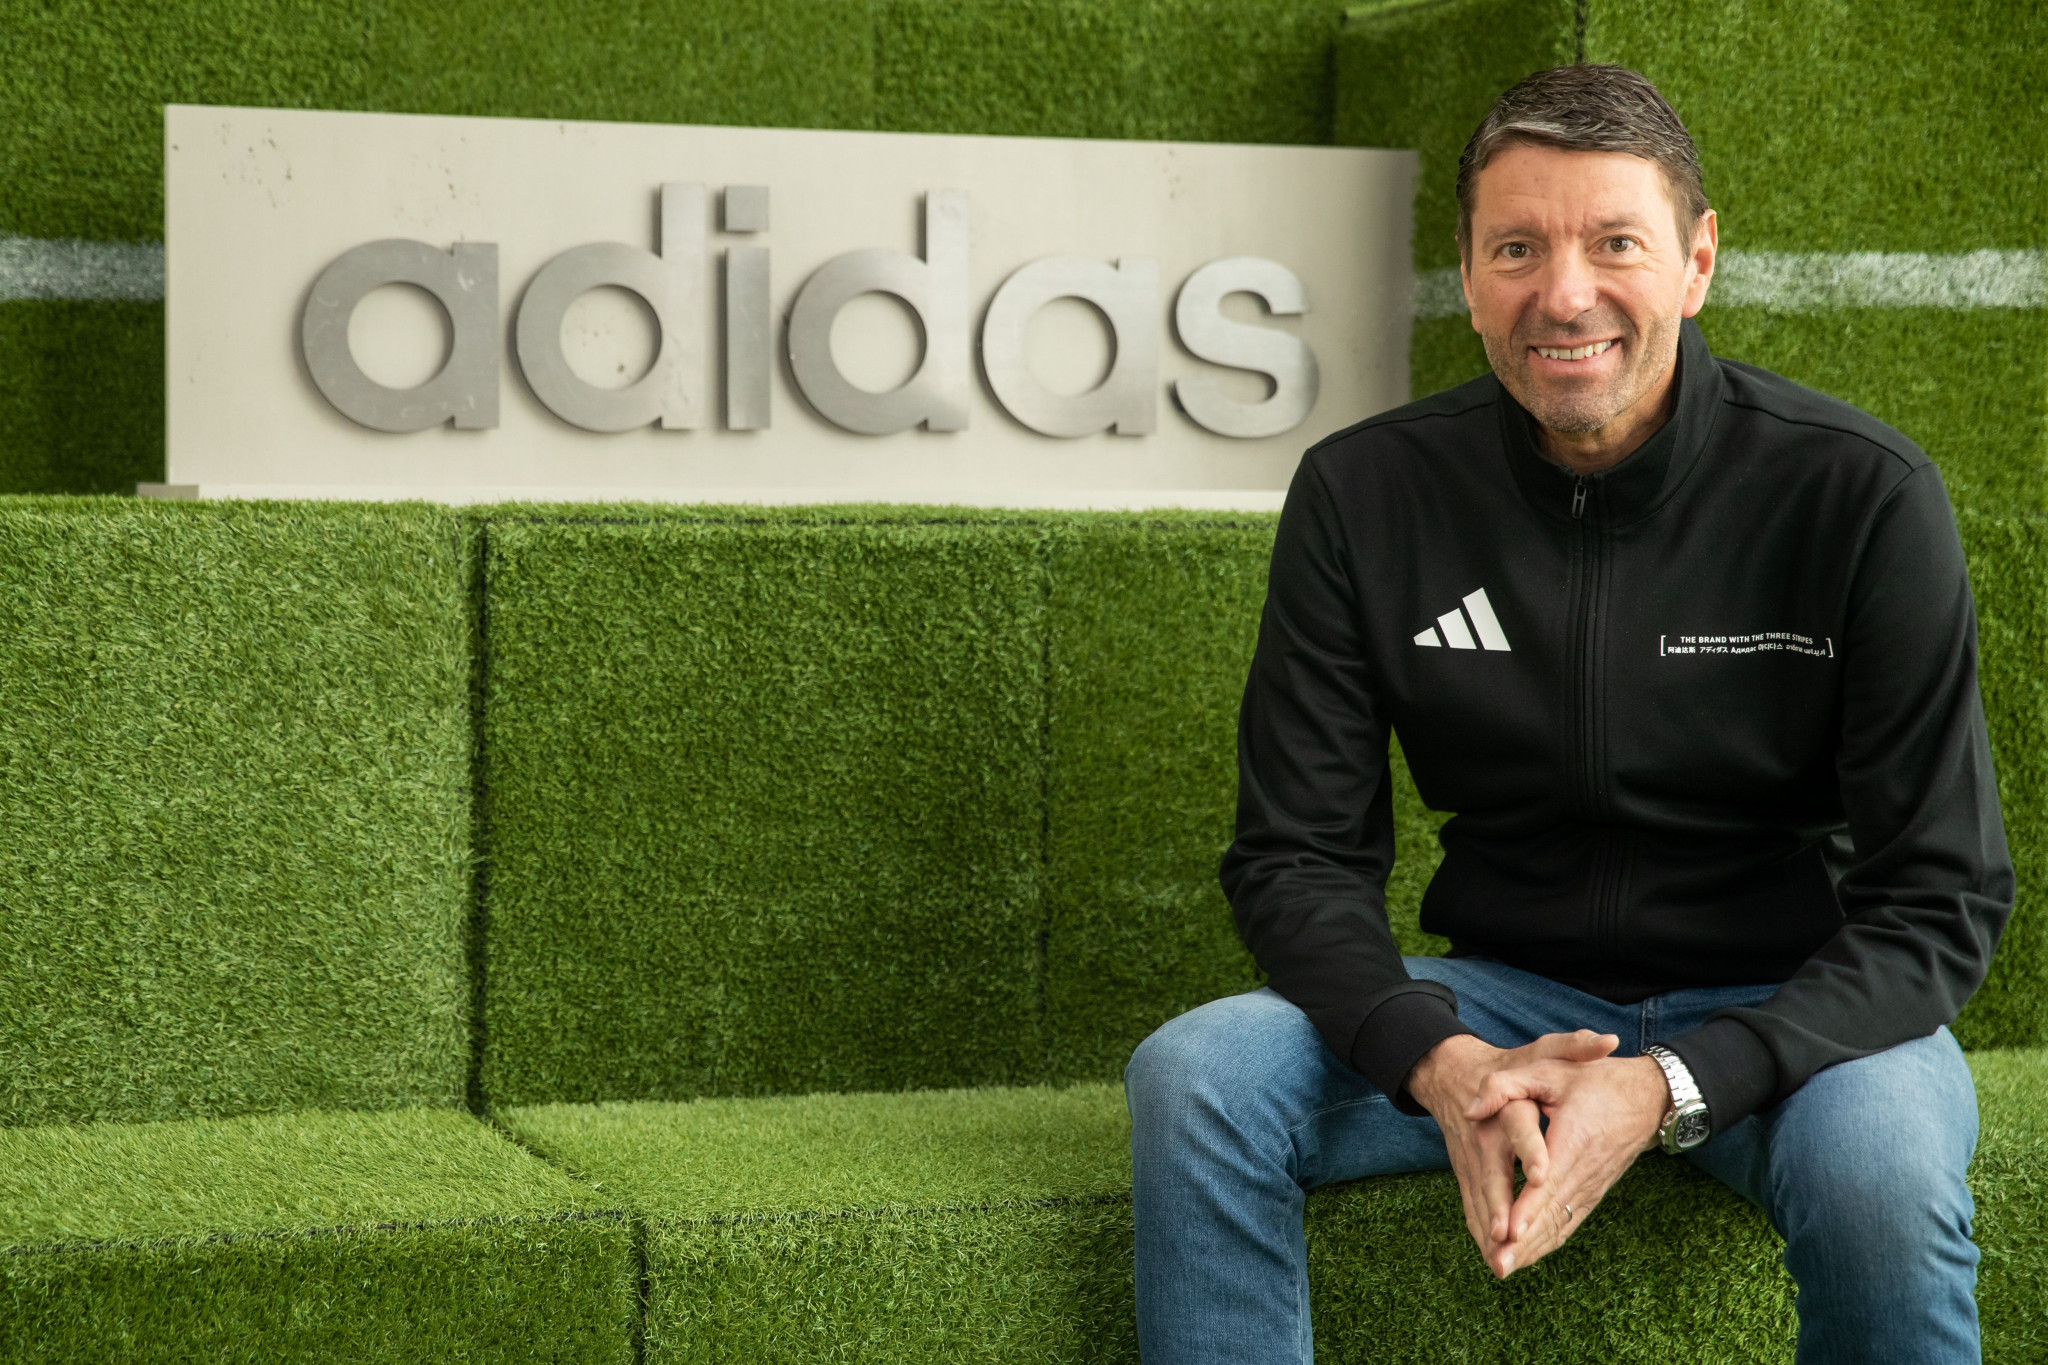 Adidas announces chief executive Rorsted to leave his role next year